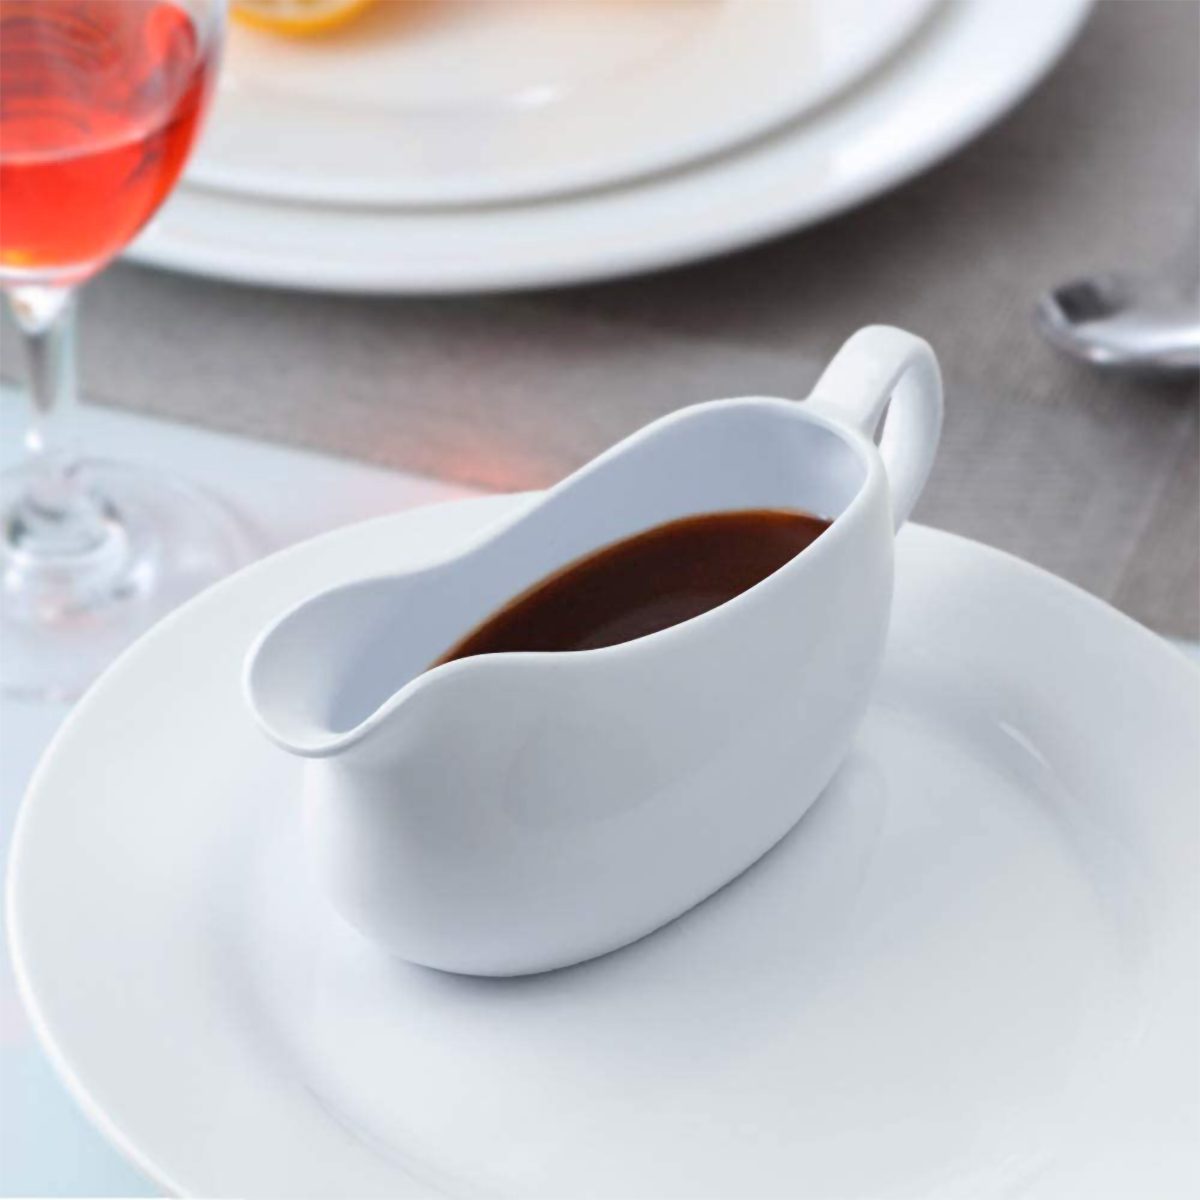 Pour Some Gravy on Me/Light Me Up Gravy Boat & Warmer - The Kitchen Table,  Quality Goods LLC